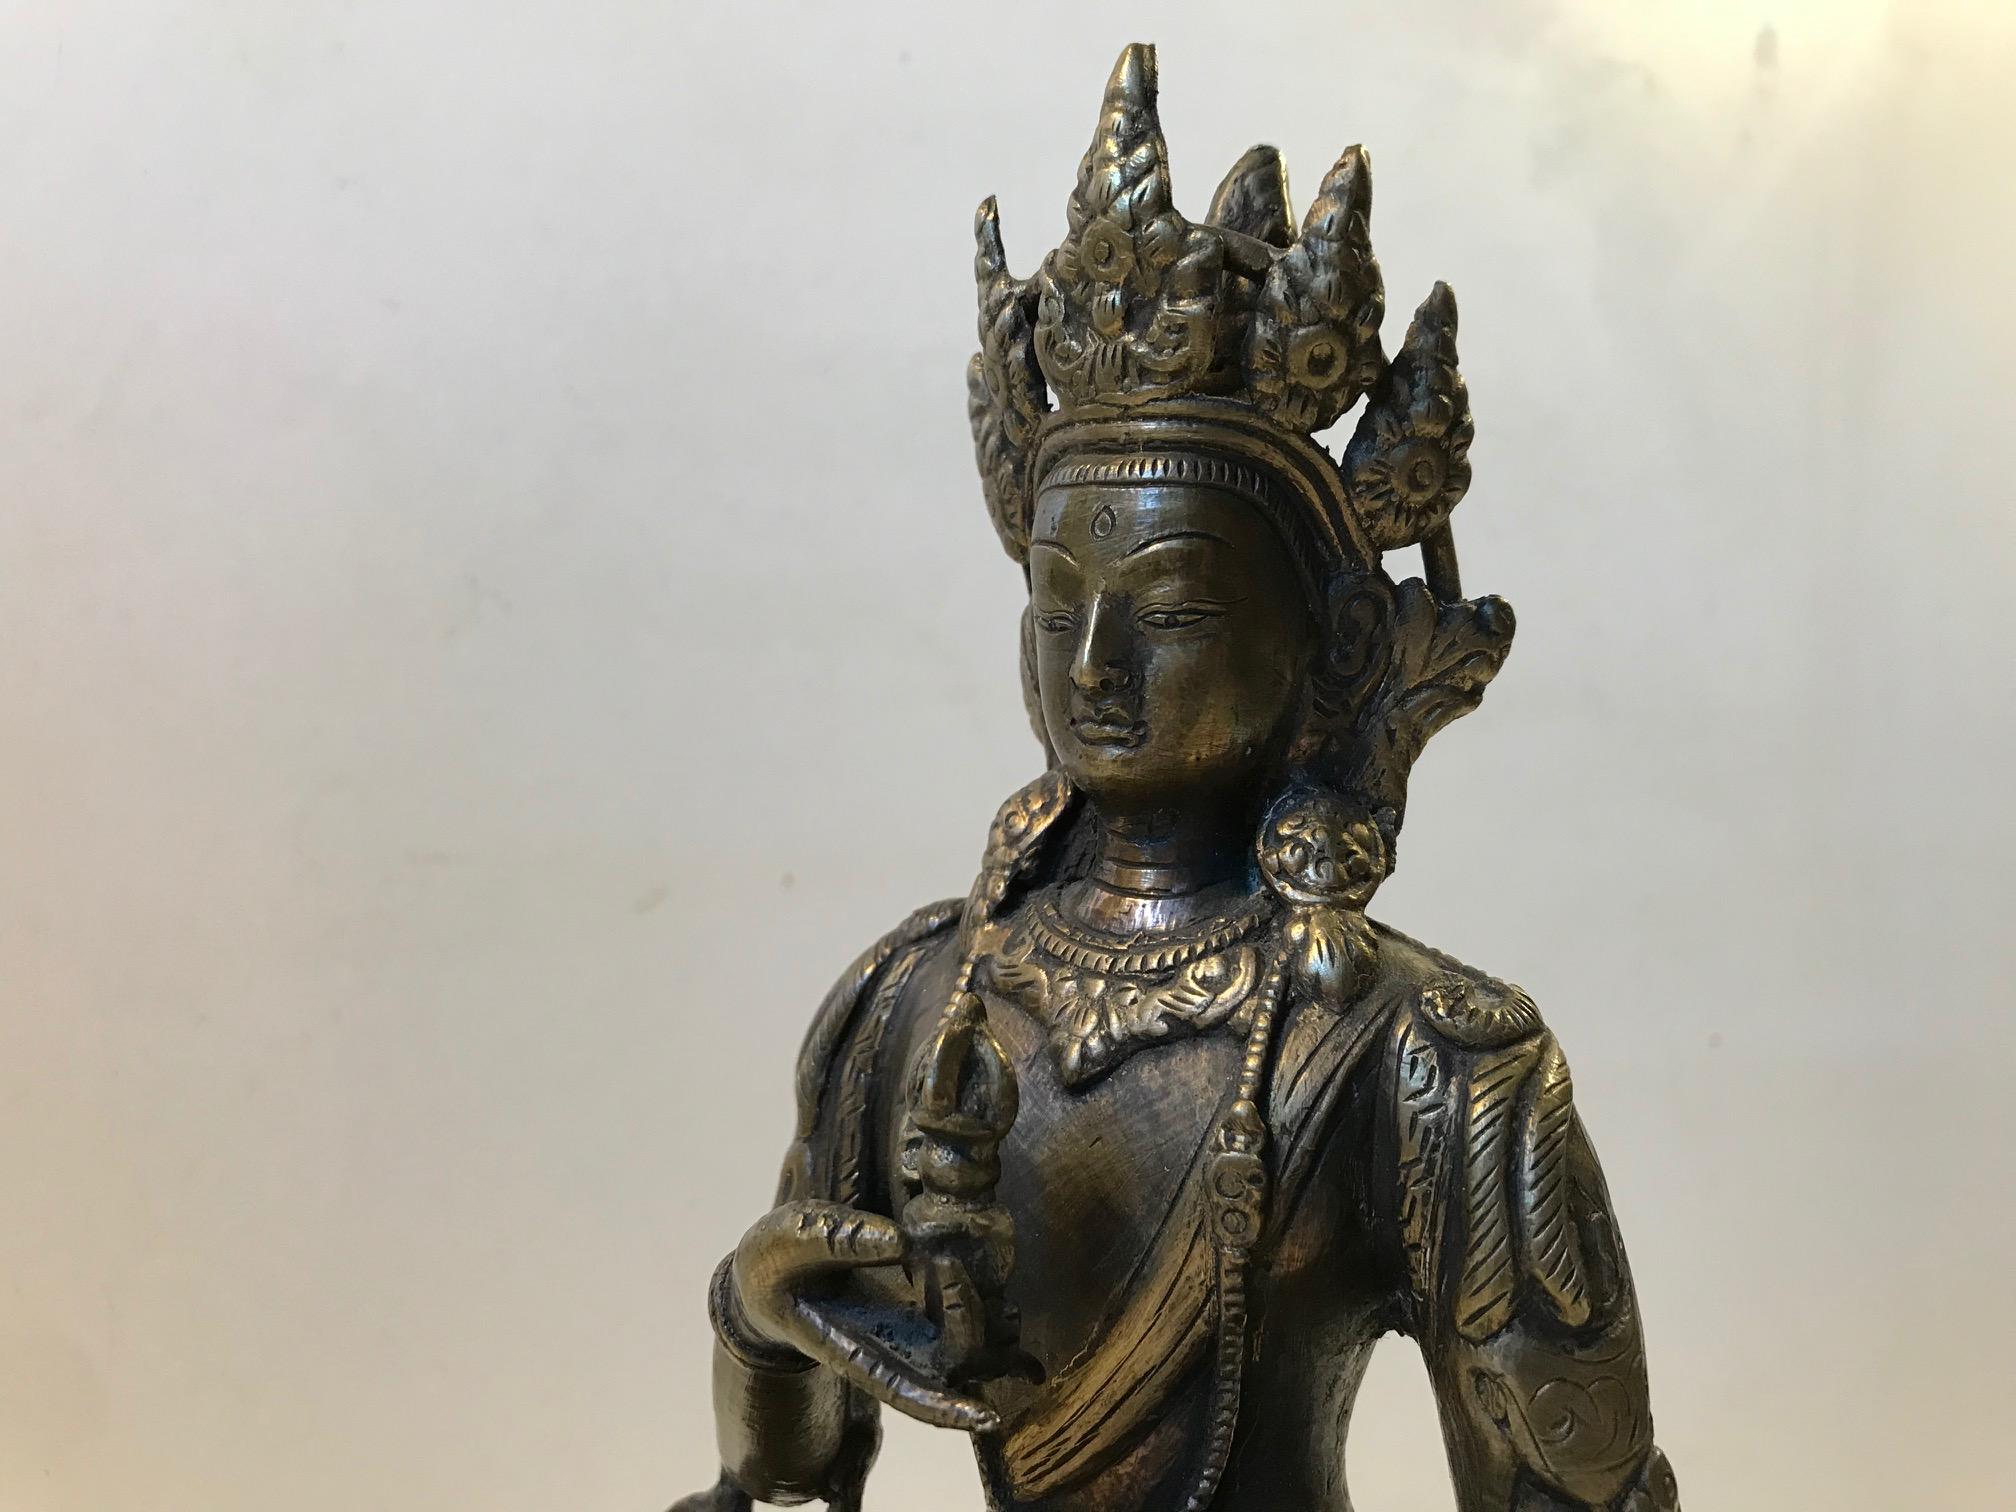 Tibetan possibly Nepalese bronze, 18th-19th century. Detailed Vajrasattva figure, a Bodhisattva. It is peacefully seated in dhyanasana (position/pose in Meditation) and resting on a single lotus base. In both hands her attributes, the Vajra symbols.